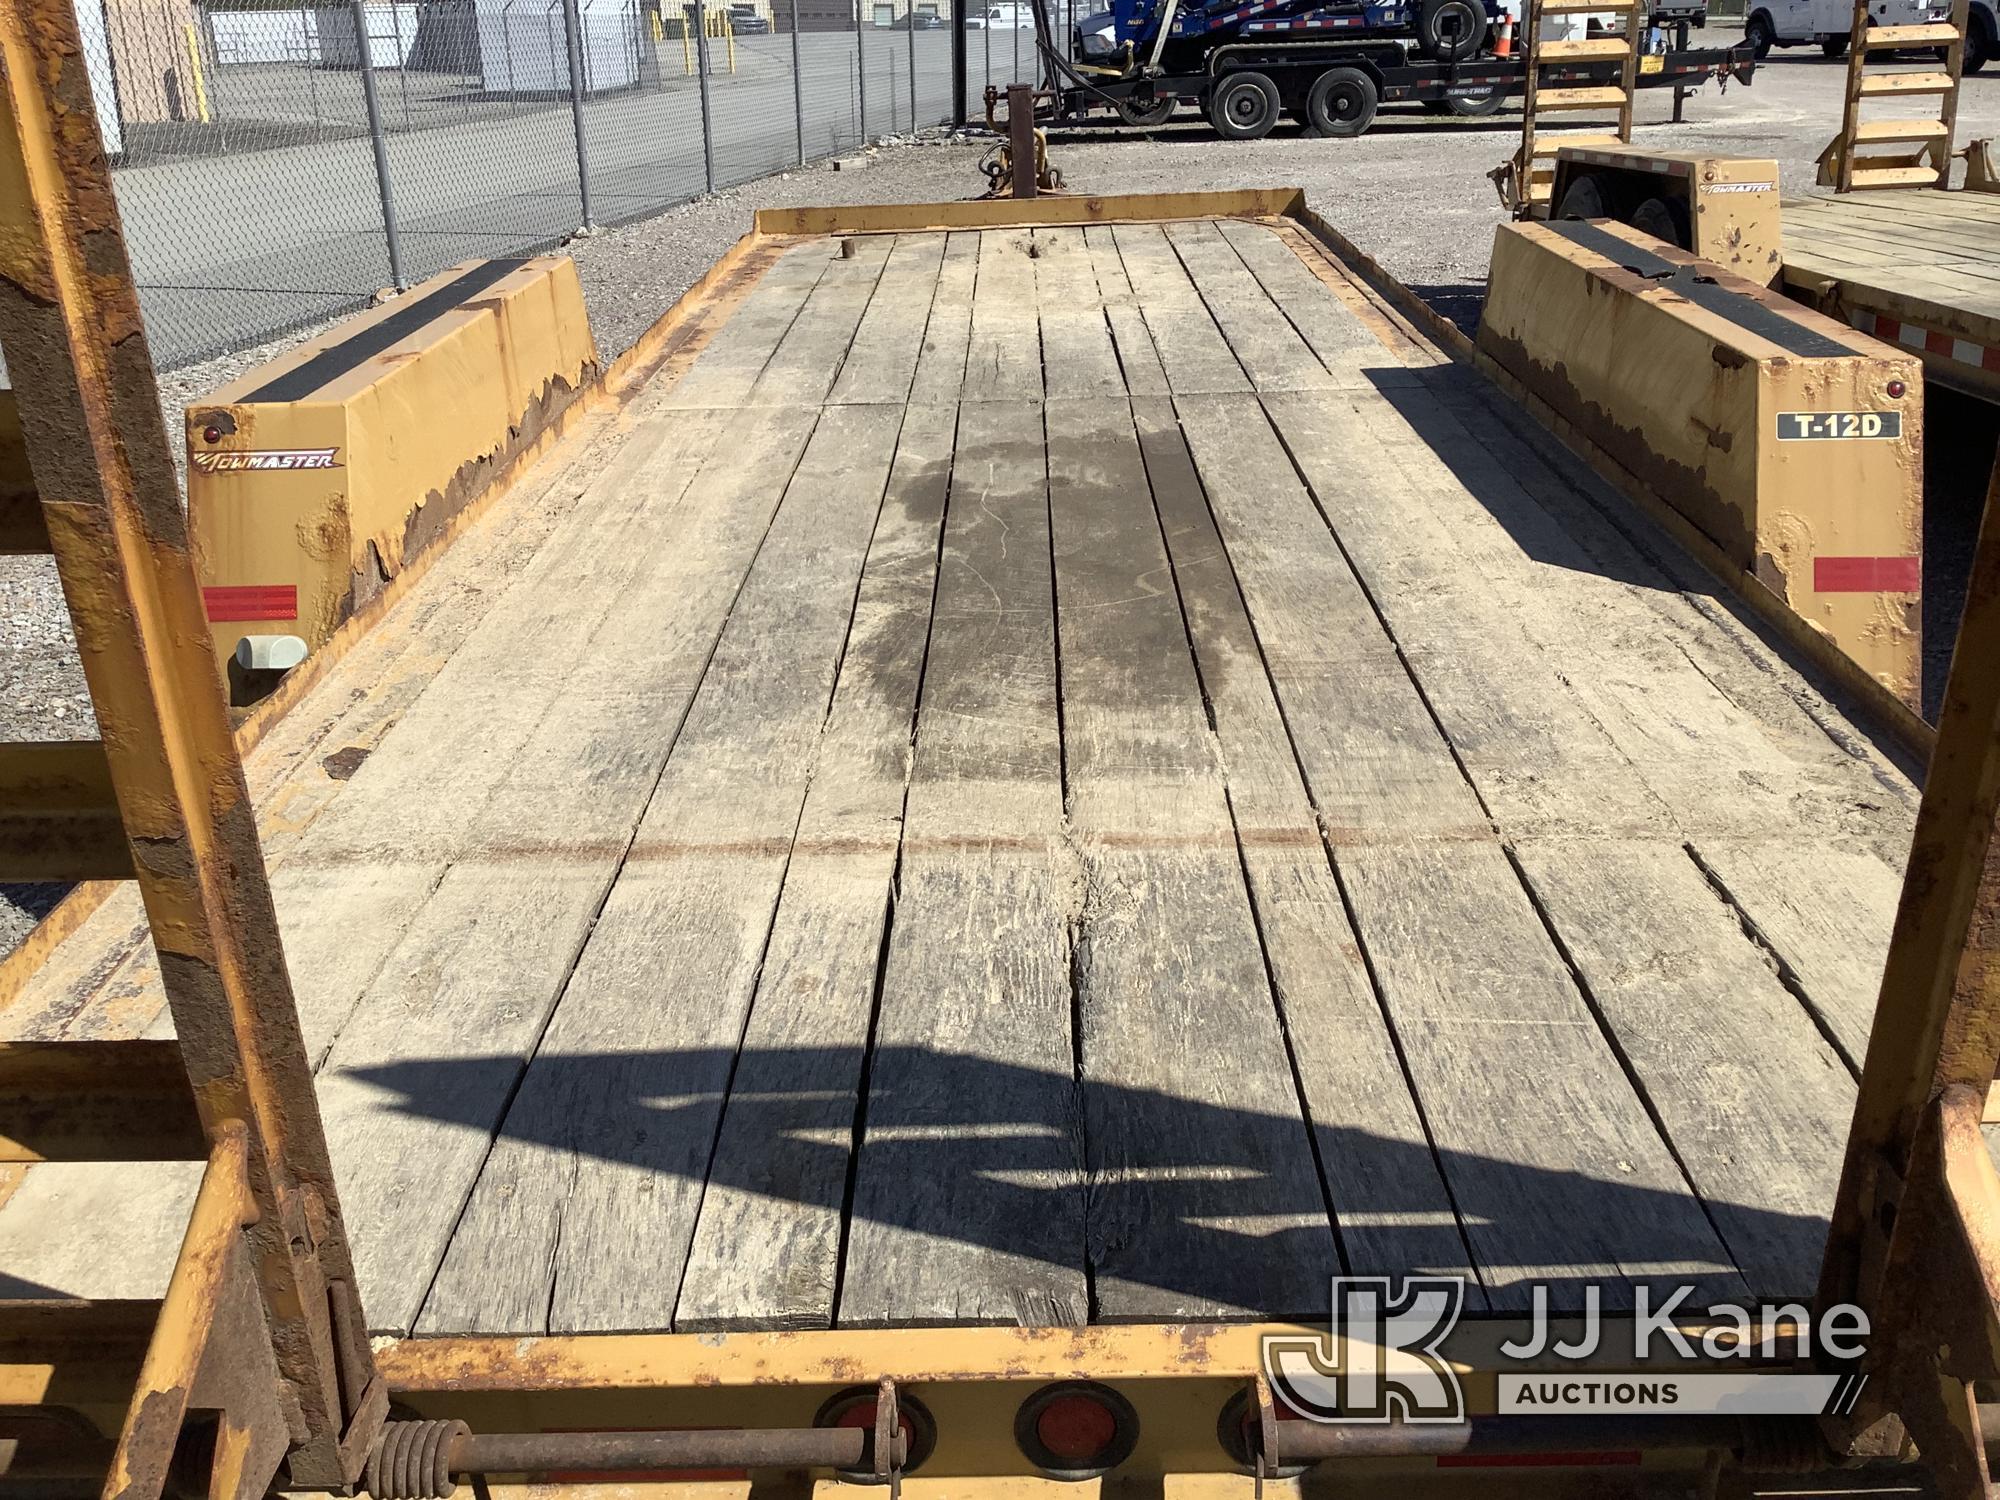 (Smock, PA) 2019 Monroe Towmaster T-12D T/A Tagalong Equipment Trailer Worn Deck, Rust Damage